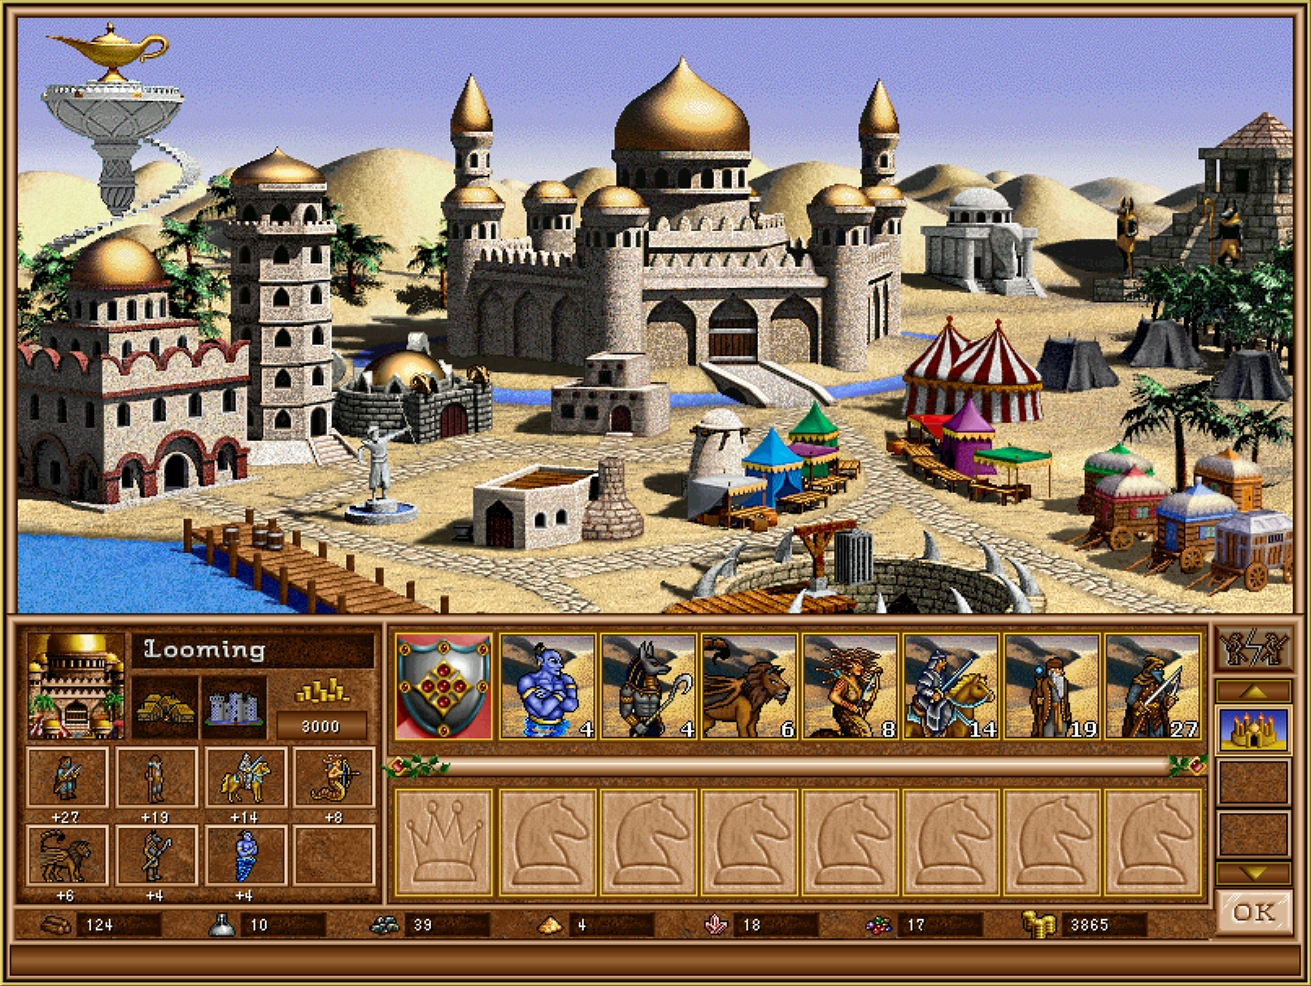 Heroes of Might and Magic III: The Succession Wars mod v0.8.2 is finally out! 